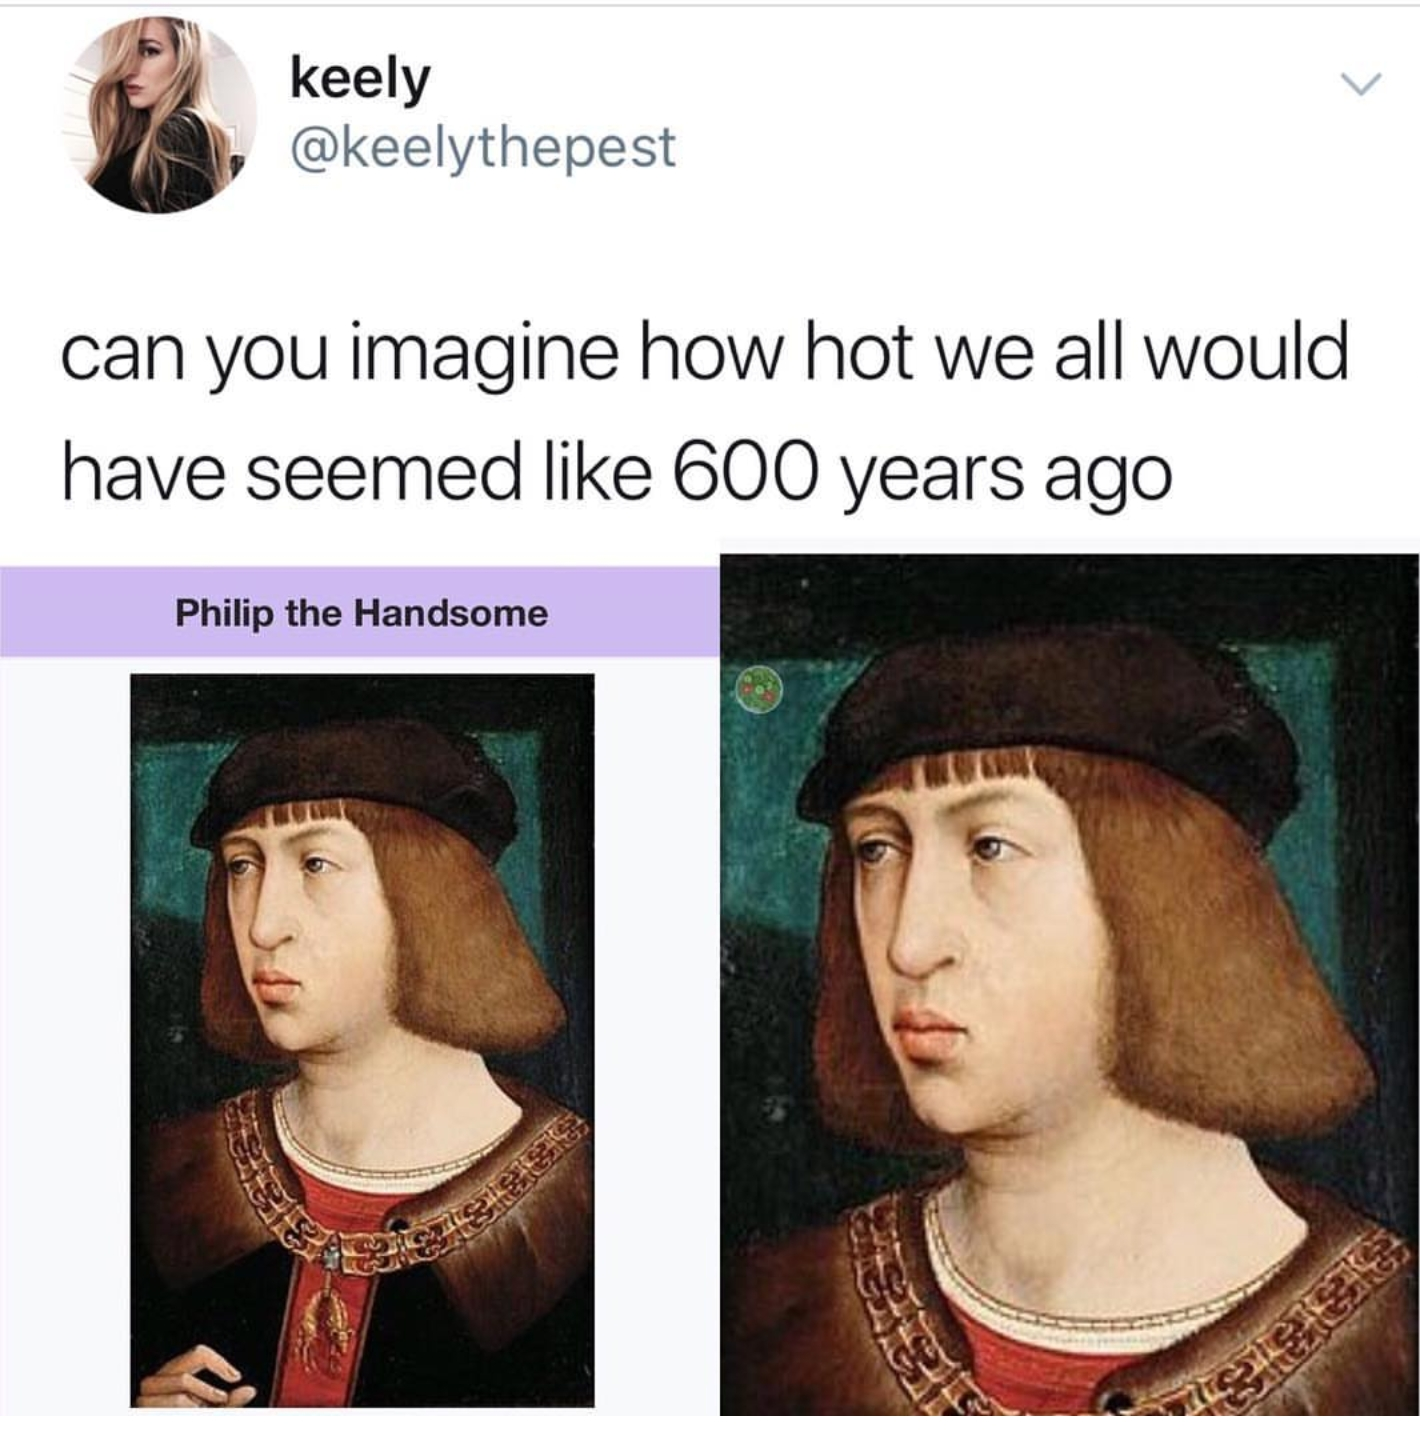 oh yeet - keely can you imagine how hot we all would have seemed 600 years ago Philip the Handsome